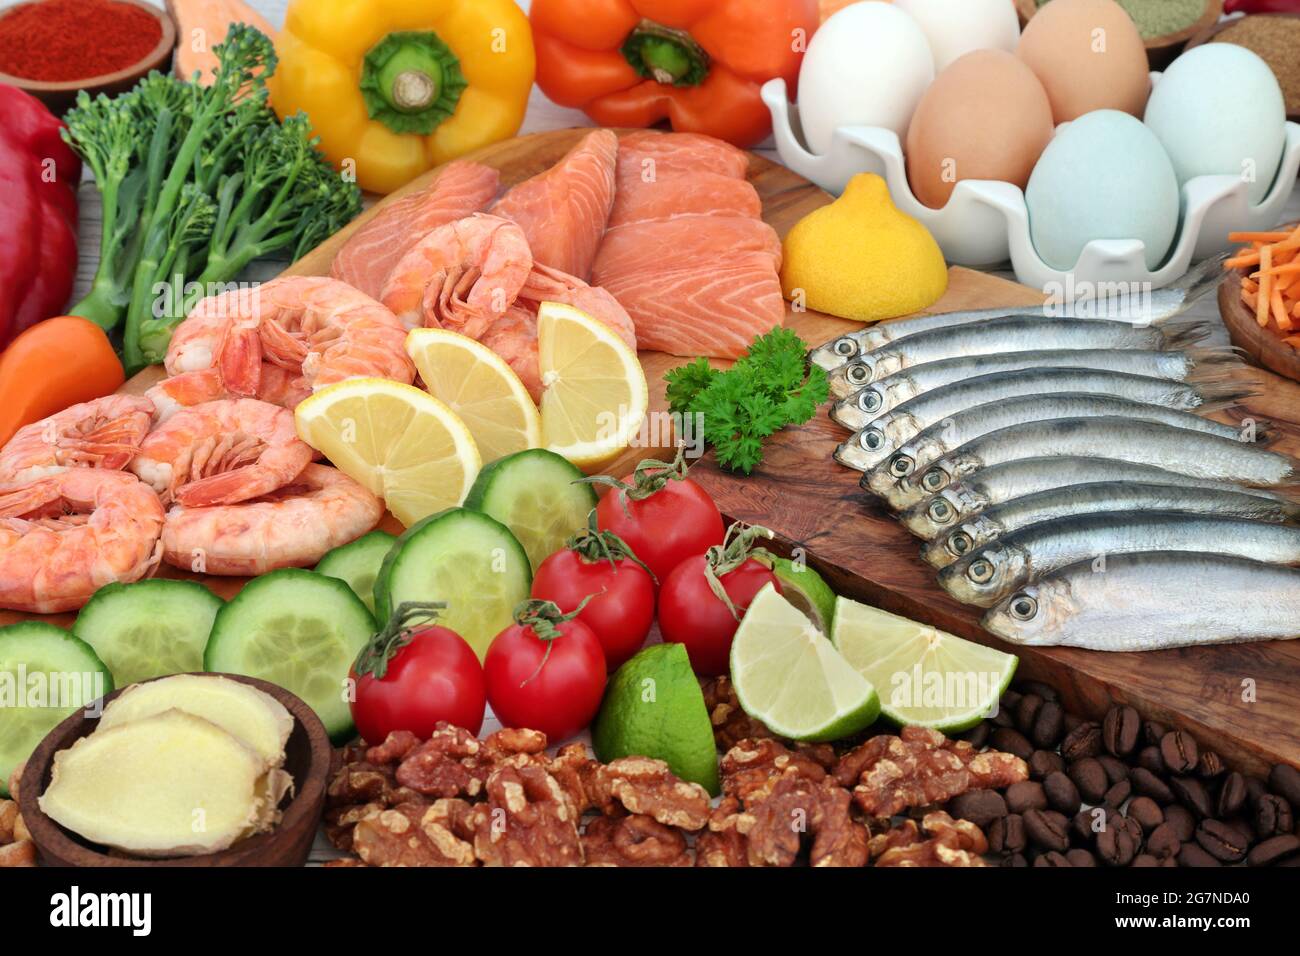 Pescatarian food concept for a balanced diet high in protein, omega 3, vitamins, minerals, antioxidants, lycopene, anthocyanins, fibre. Stock Photo